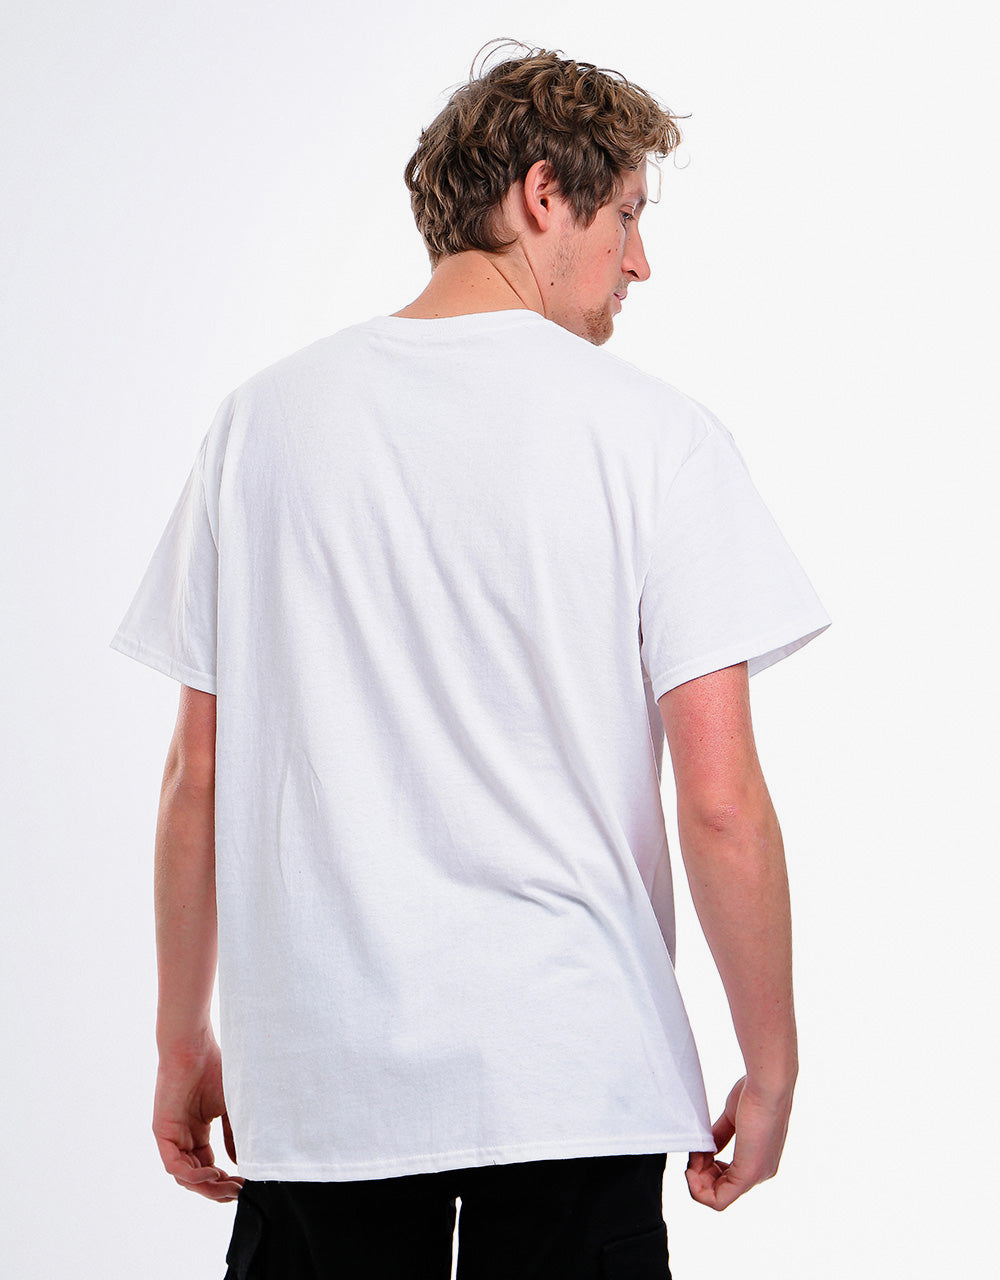 Route One Focus T-Shirt - White